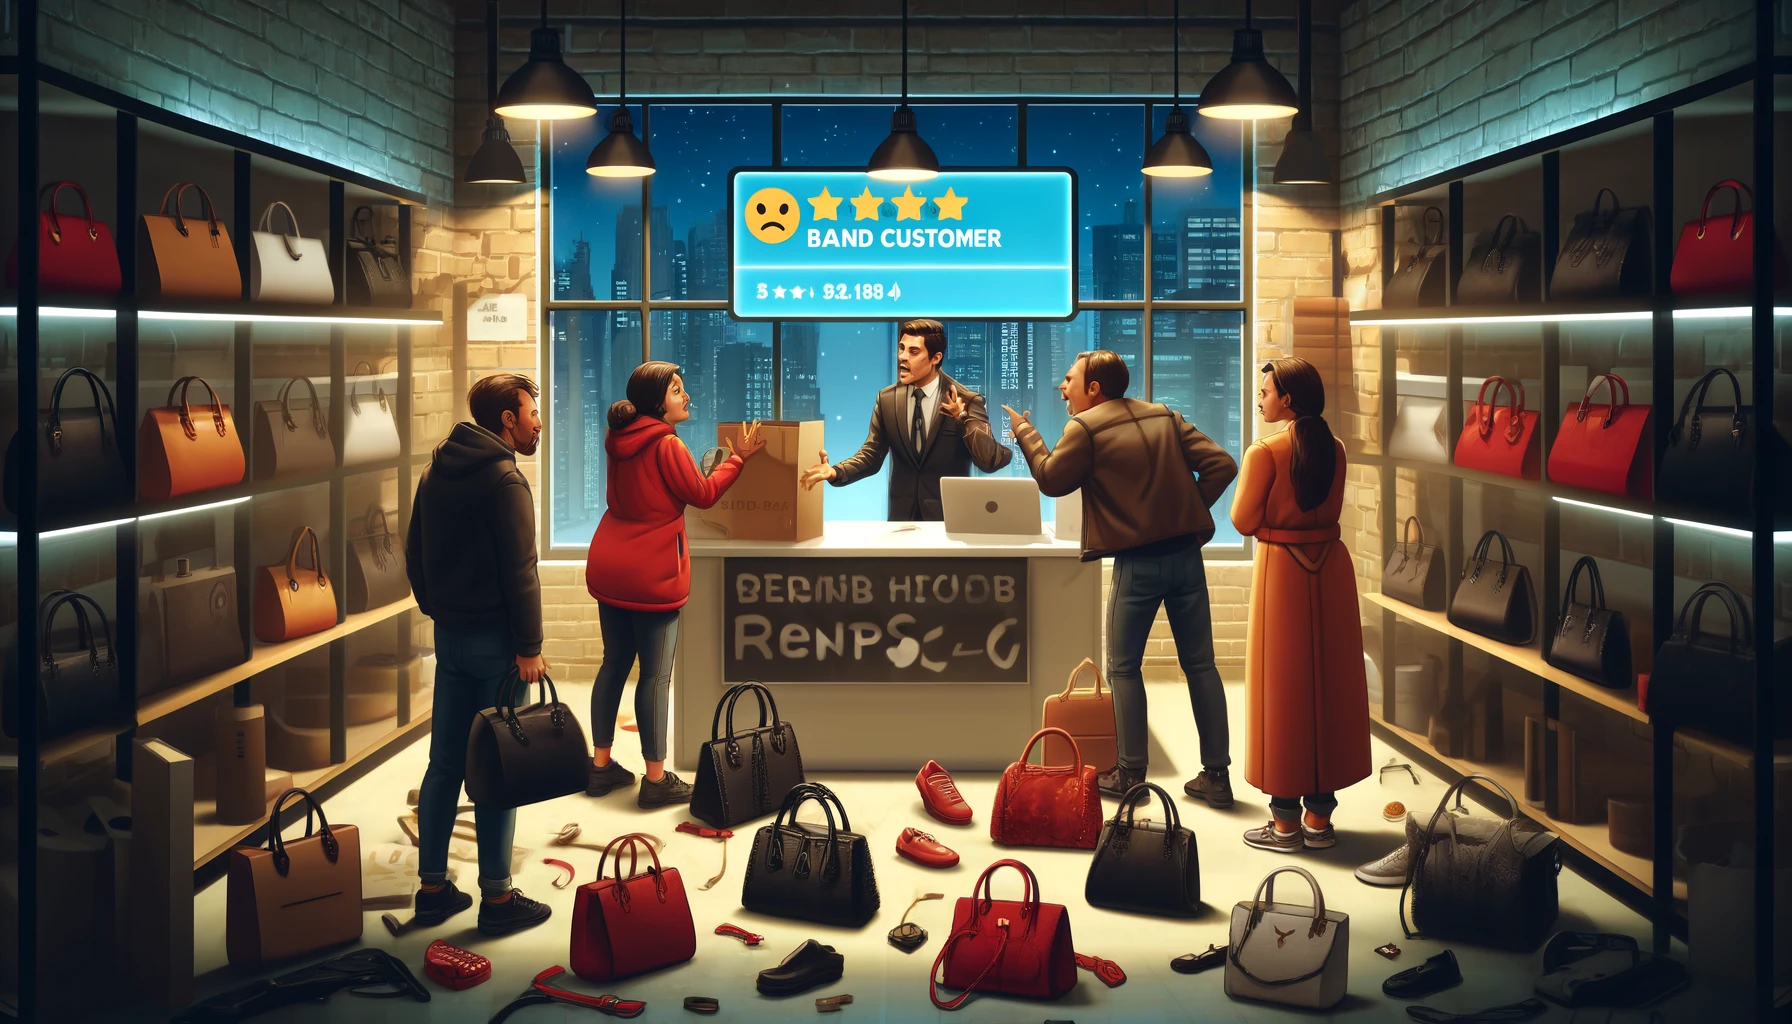 A scene depicting poor customer experiences at a brand handbag rental service. The boutique is disorganized, with bags scattered and shelves messy. Frustrated customers, representing various ethnicities, are arguing with a store clerk who appears overwhelmed. The digital display in the store shows negative customer reviews and low star ratings. The lighting is dim, creating a less inviting atmosphere. Outside, a rainy city scene contributes to the gloomy mood of the setting.